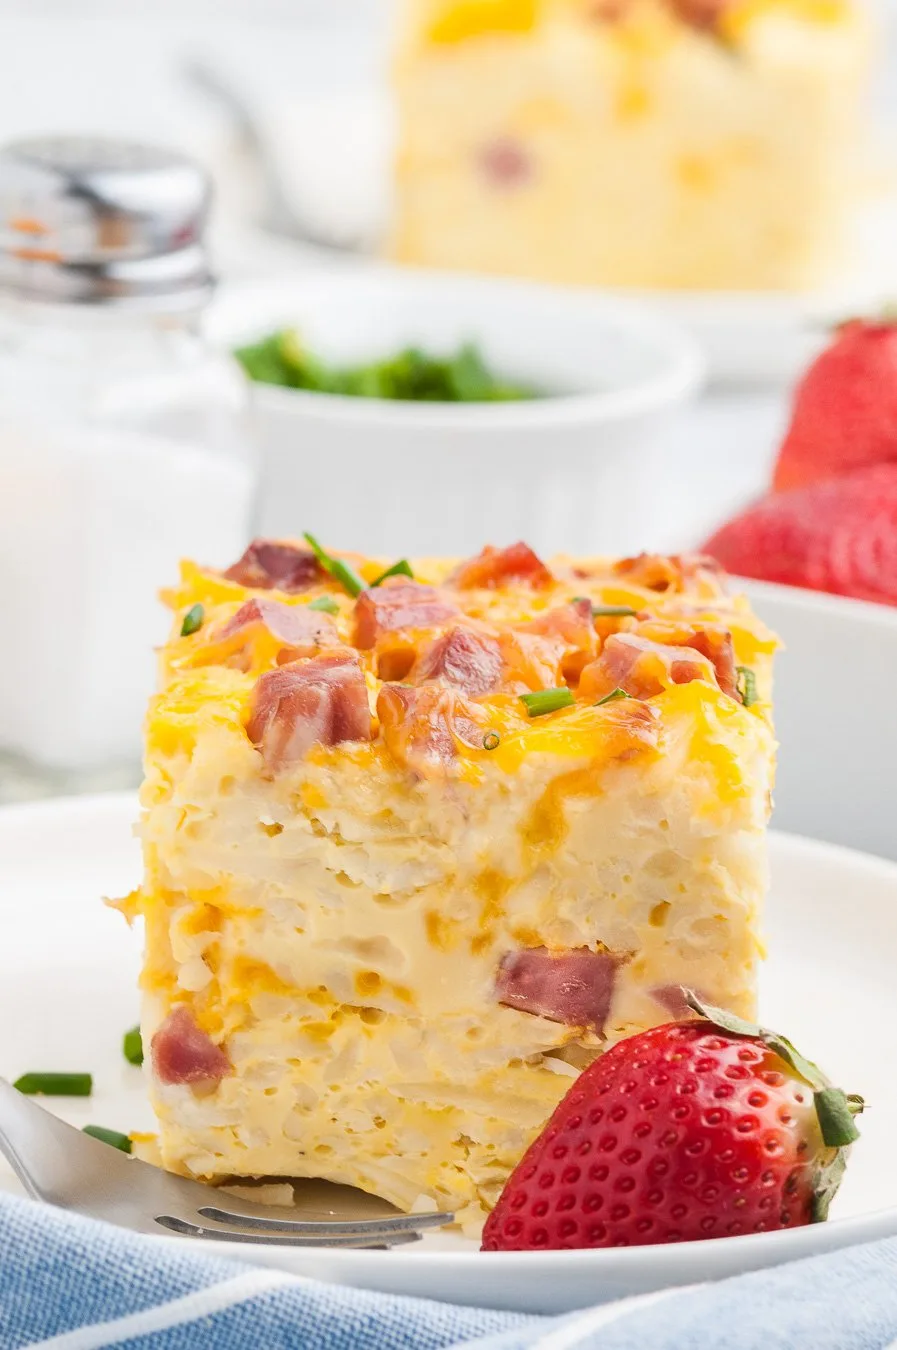 tall breakfast casserole on a dish with chunks of ham showing through. Paired with a fresh strawberry garnish. Hint of blue napkin near plate.